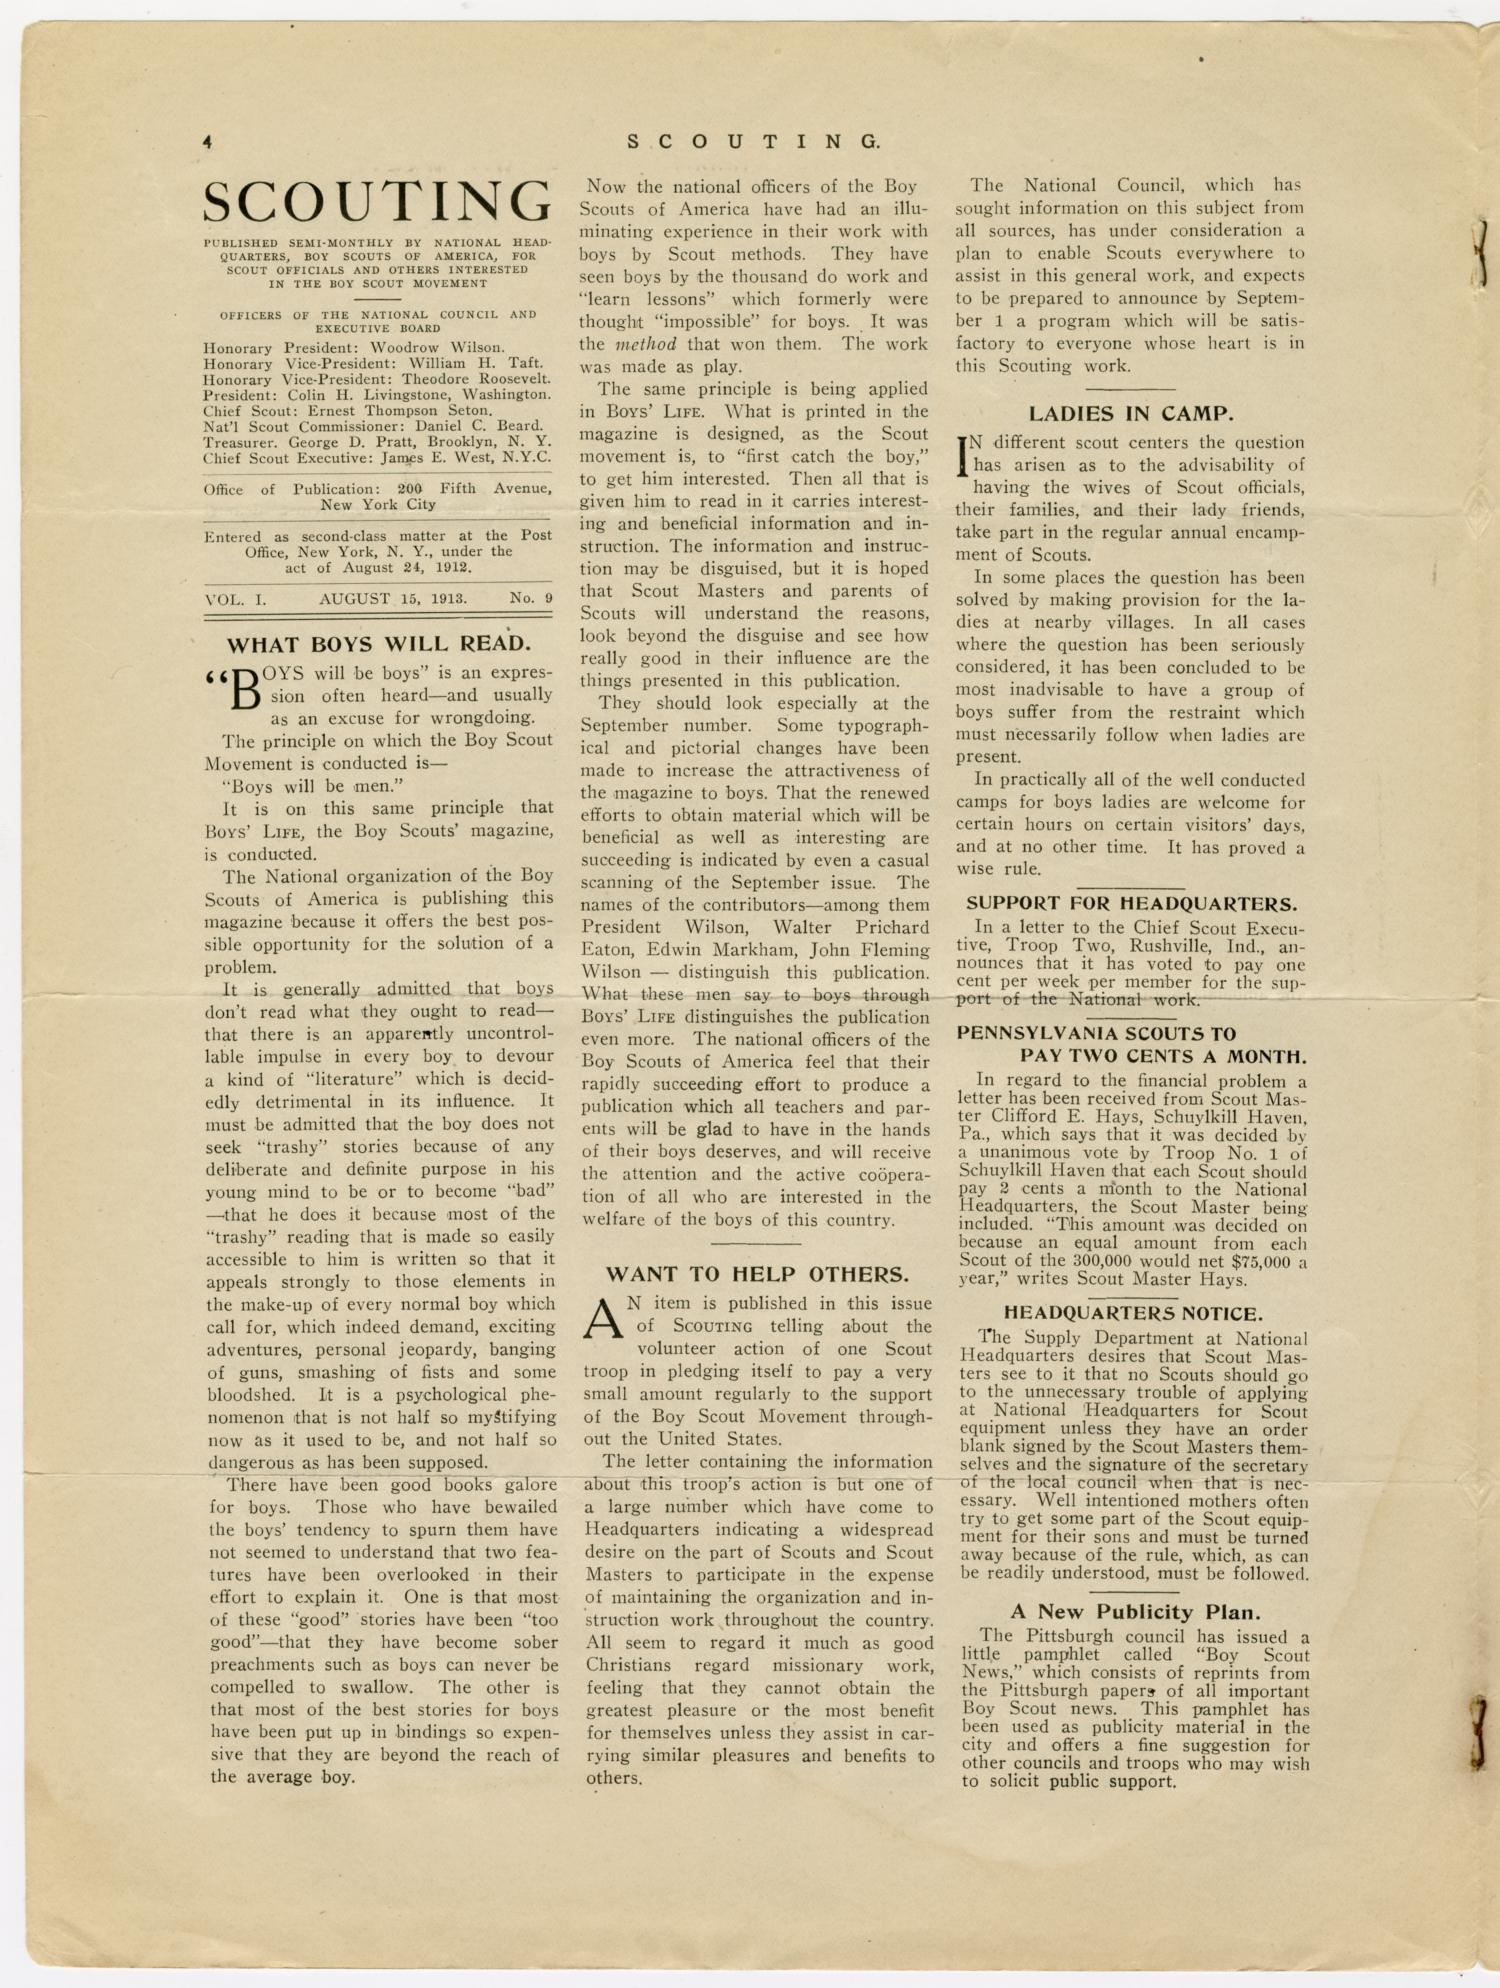 Scouting, Volume 1, Number 9, August 15, 1913
                                                
                                                    4
                                                